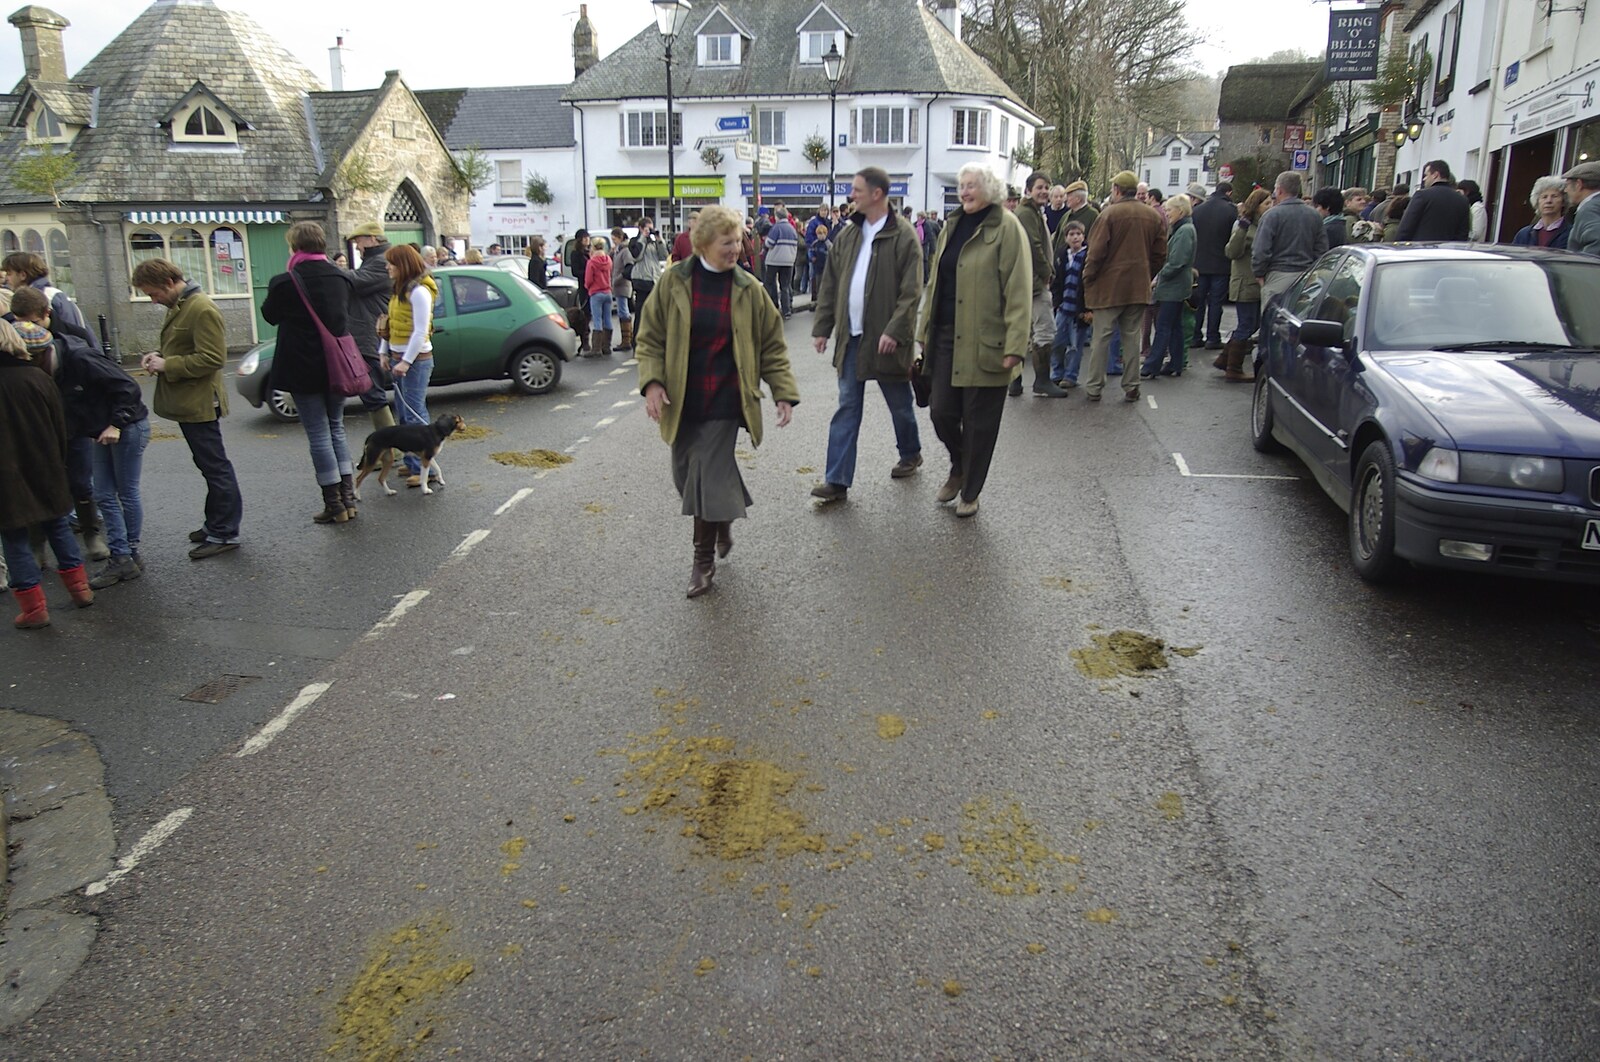 The square is covered in horse poo from A Boxing Day Hunt, Chagford, Devon - 26th December 2007